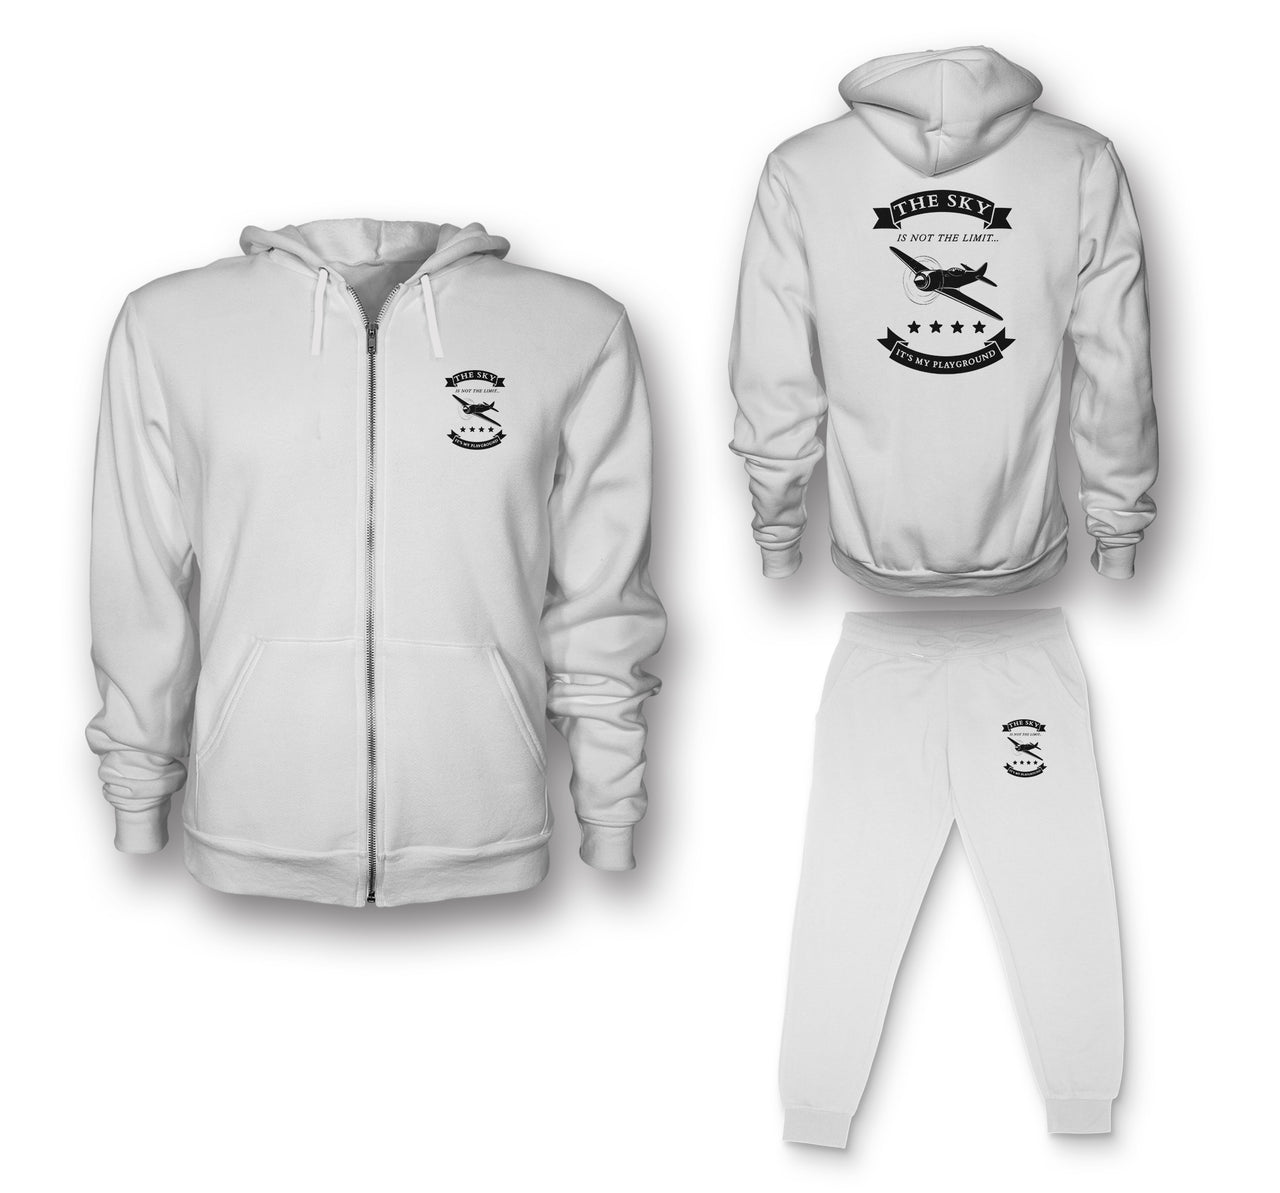 The Sky is not the limit, It's my playground Designed Zipped Hoodies & Sweatpants Set